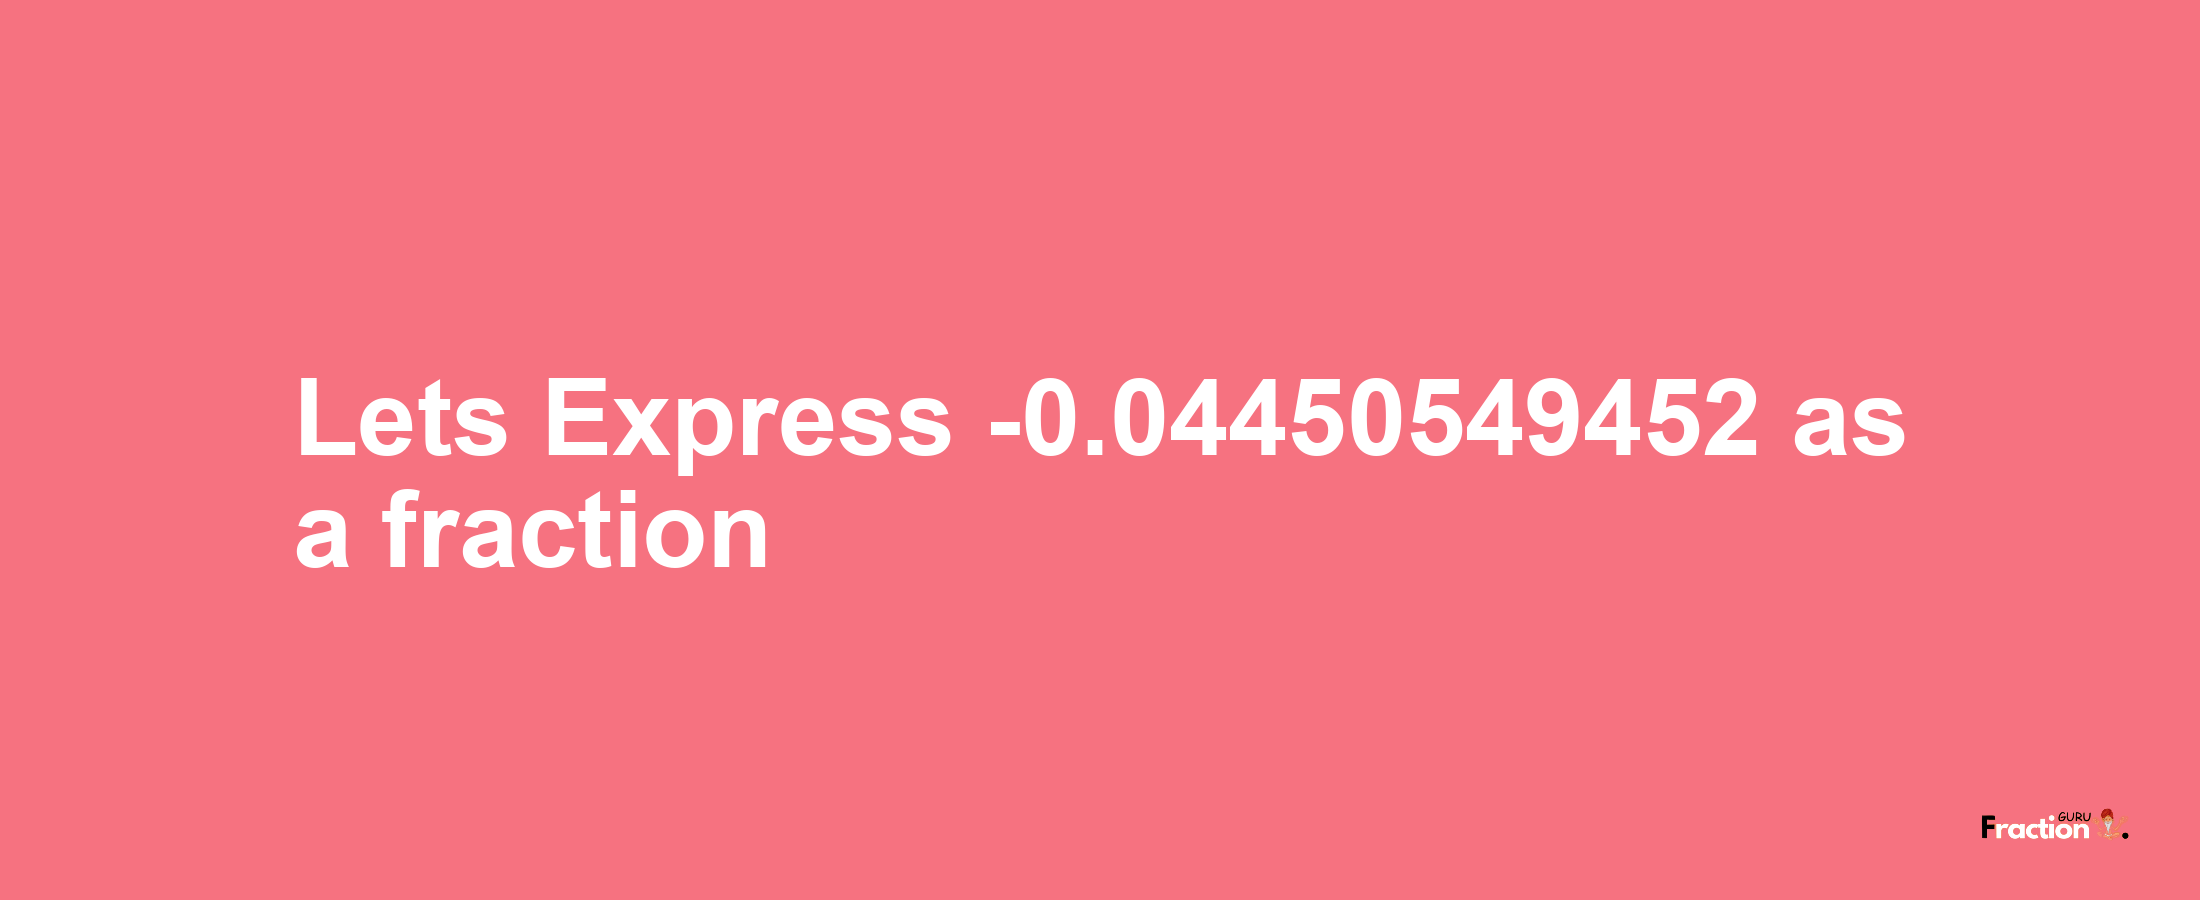 Lets Express -0.04450549452 as afraction